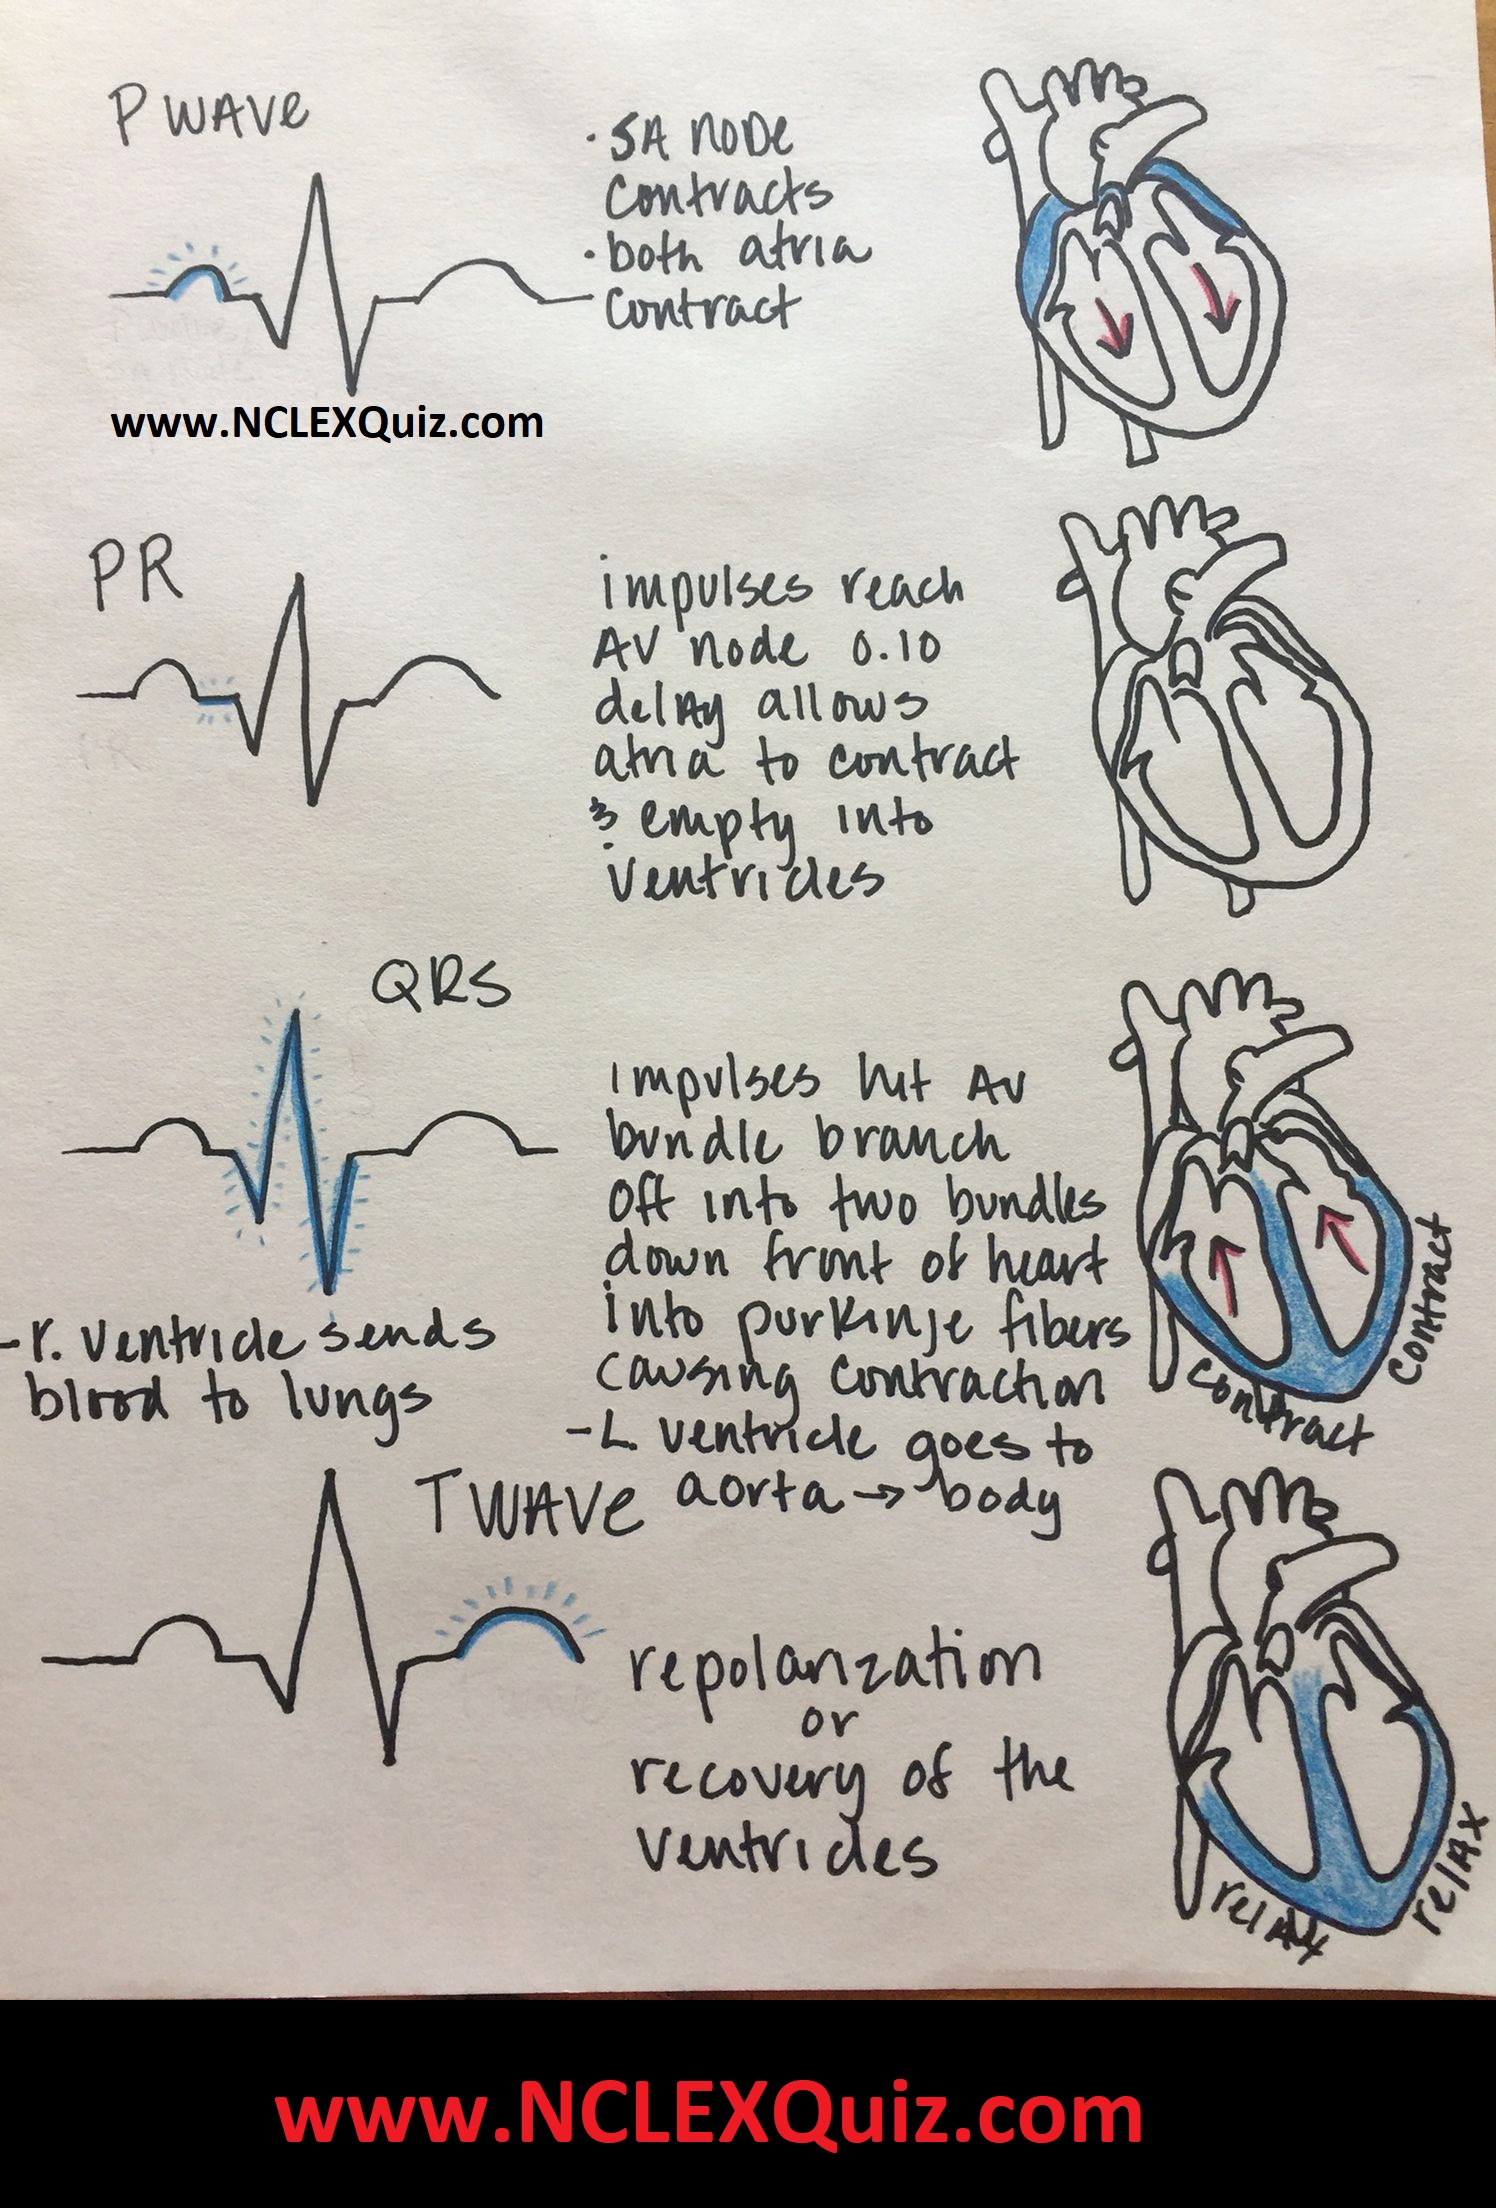 Electrical Events of the Cardiac Cycle ECG and electrical activity of the heart